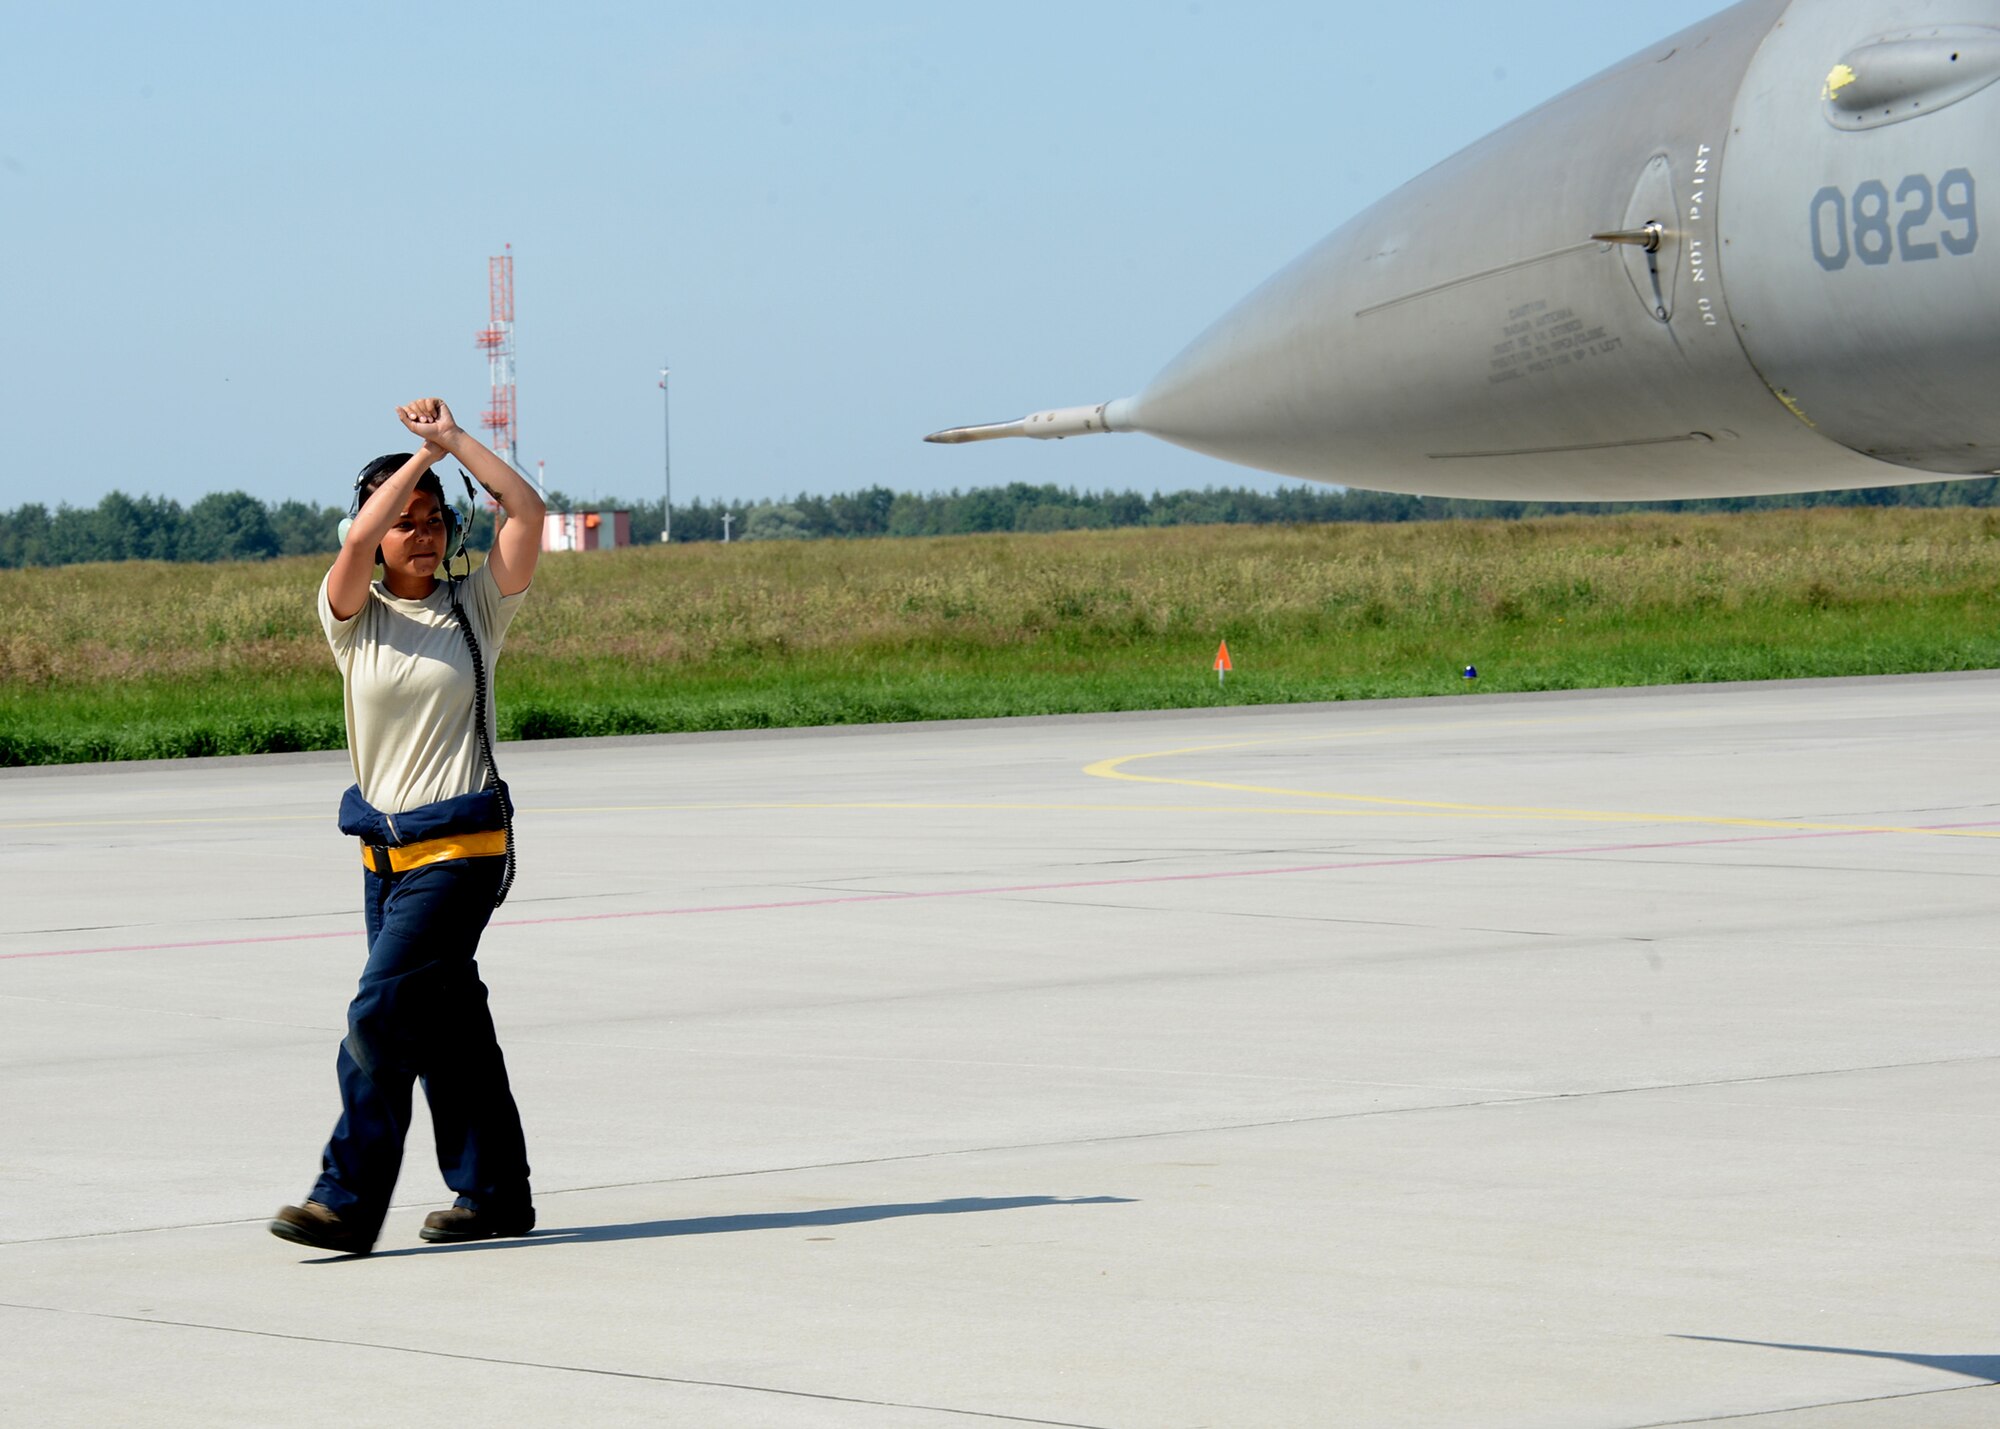 U.S. Air Force Senior Airman Kimberly Szydlowski, a 52nd Aircraft Maintenance Squadron F-16 Fighting Falcon fighter aircraft crew chief from St. Louis, directs an F-16 pilot before departure at Lask Air Base, Poland, June 9, 2014. The U.S. Aviation Detachment in Poland supported the rotation of USAF F-16s to Poland to support various combined exercises, including the Polish-led exercise EAGLE TALON. Exercises such as these build partnership capacity between NATO allies and strengthen strategic partnerships. (U.S. Air Force photo by Airman 1st Class Kyle Gese/Released)